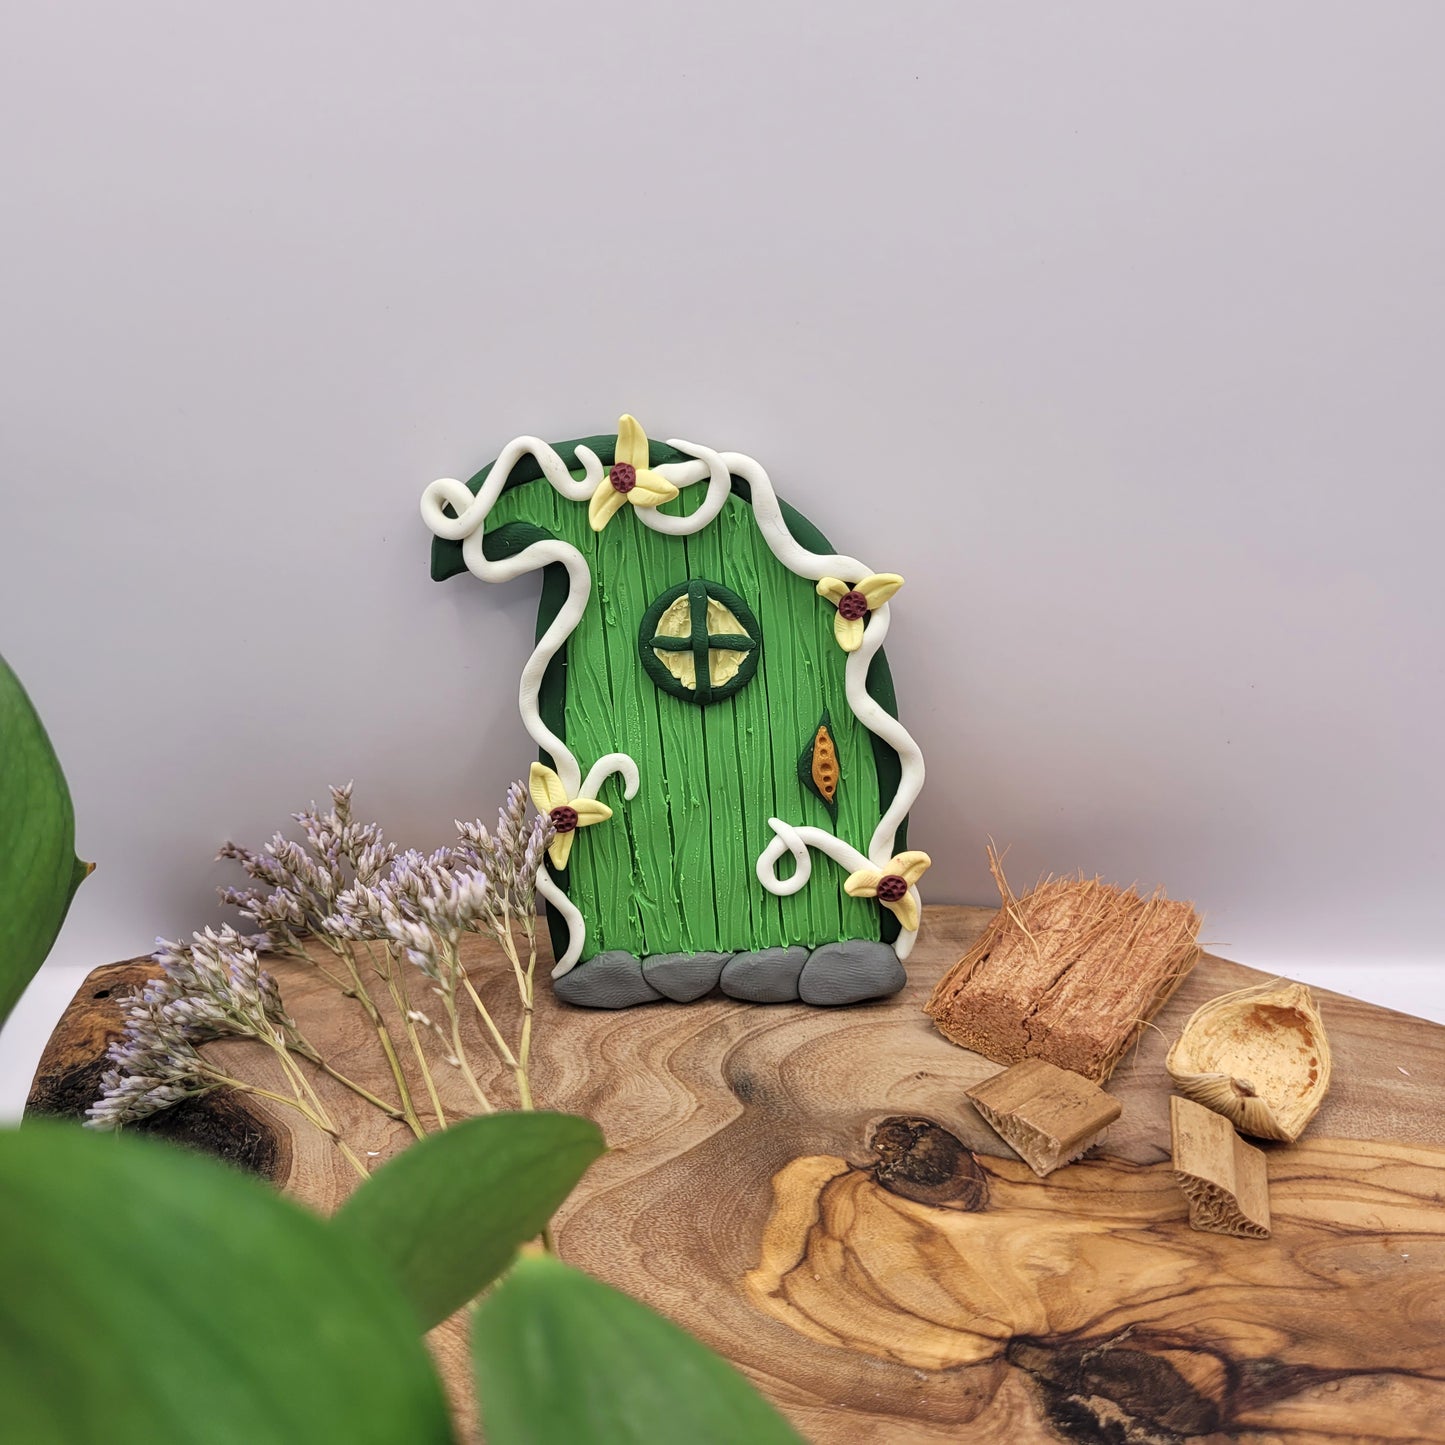 The Elvish fairy door sits on an oak wood platform surrounded by dried flowers and wood. Shaped like a leaf, this Elvish door has green wood patterning, white vine finish, and a window. It is detailed with yellow flowers.